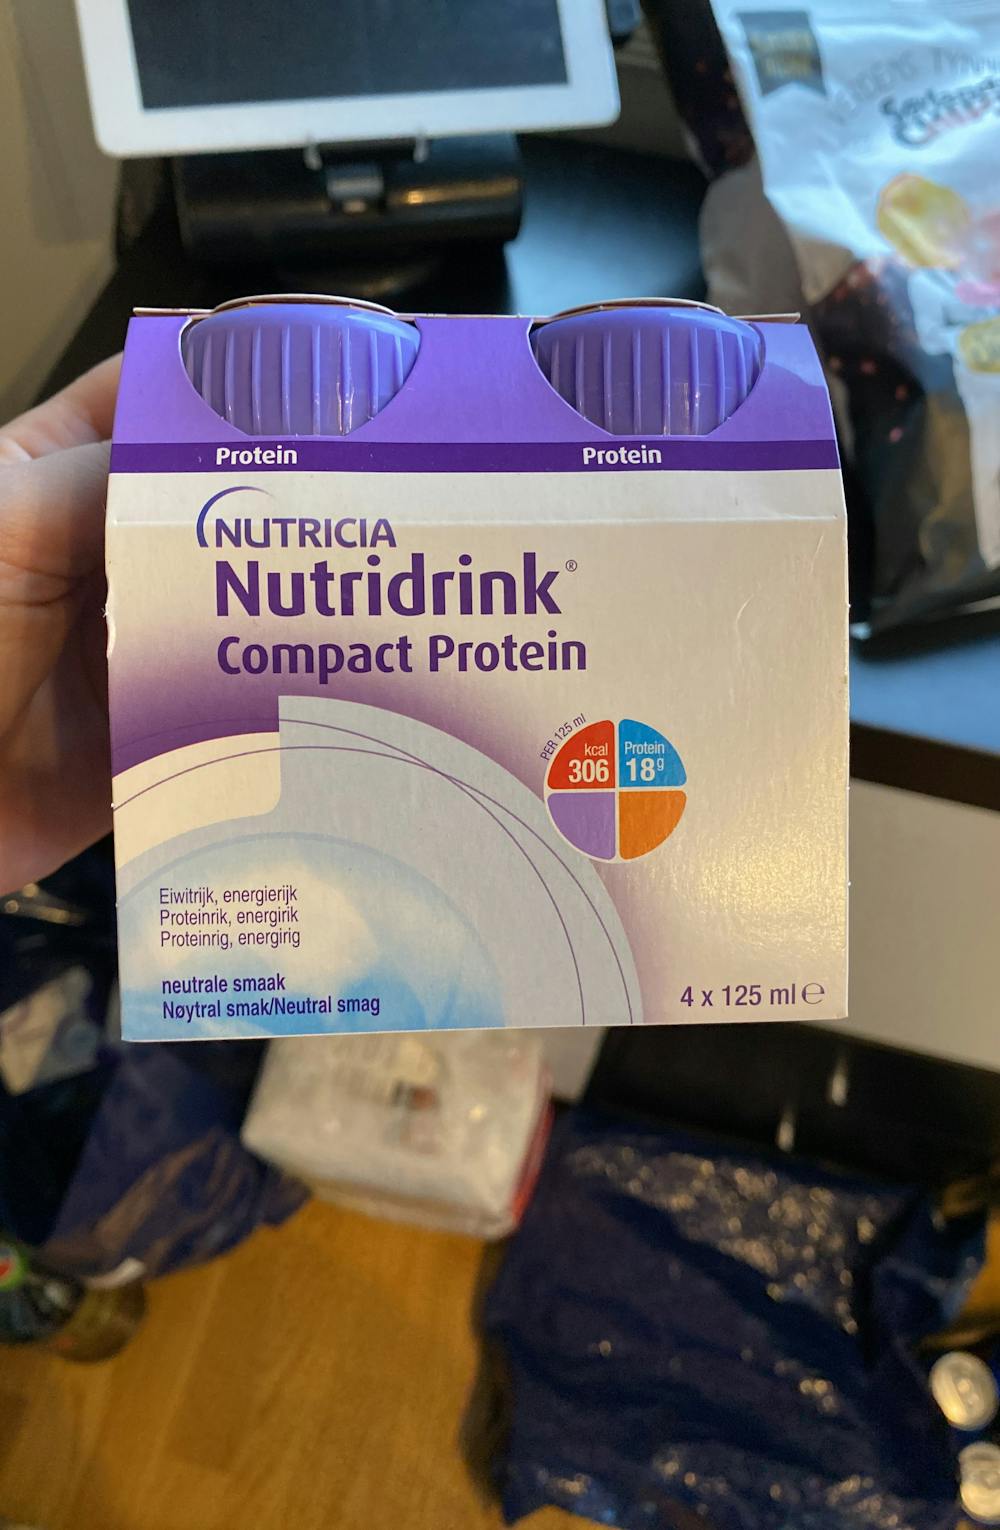 Nutridrink Compact Protein, nøytral smak, Nutricia